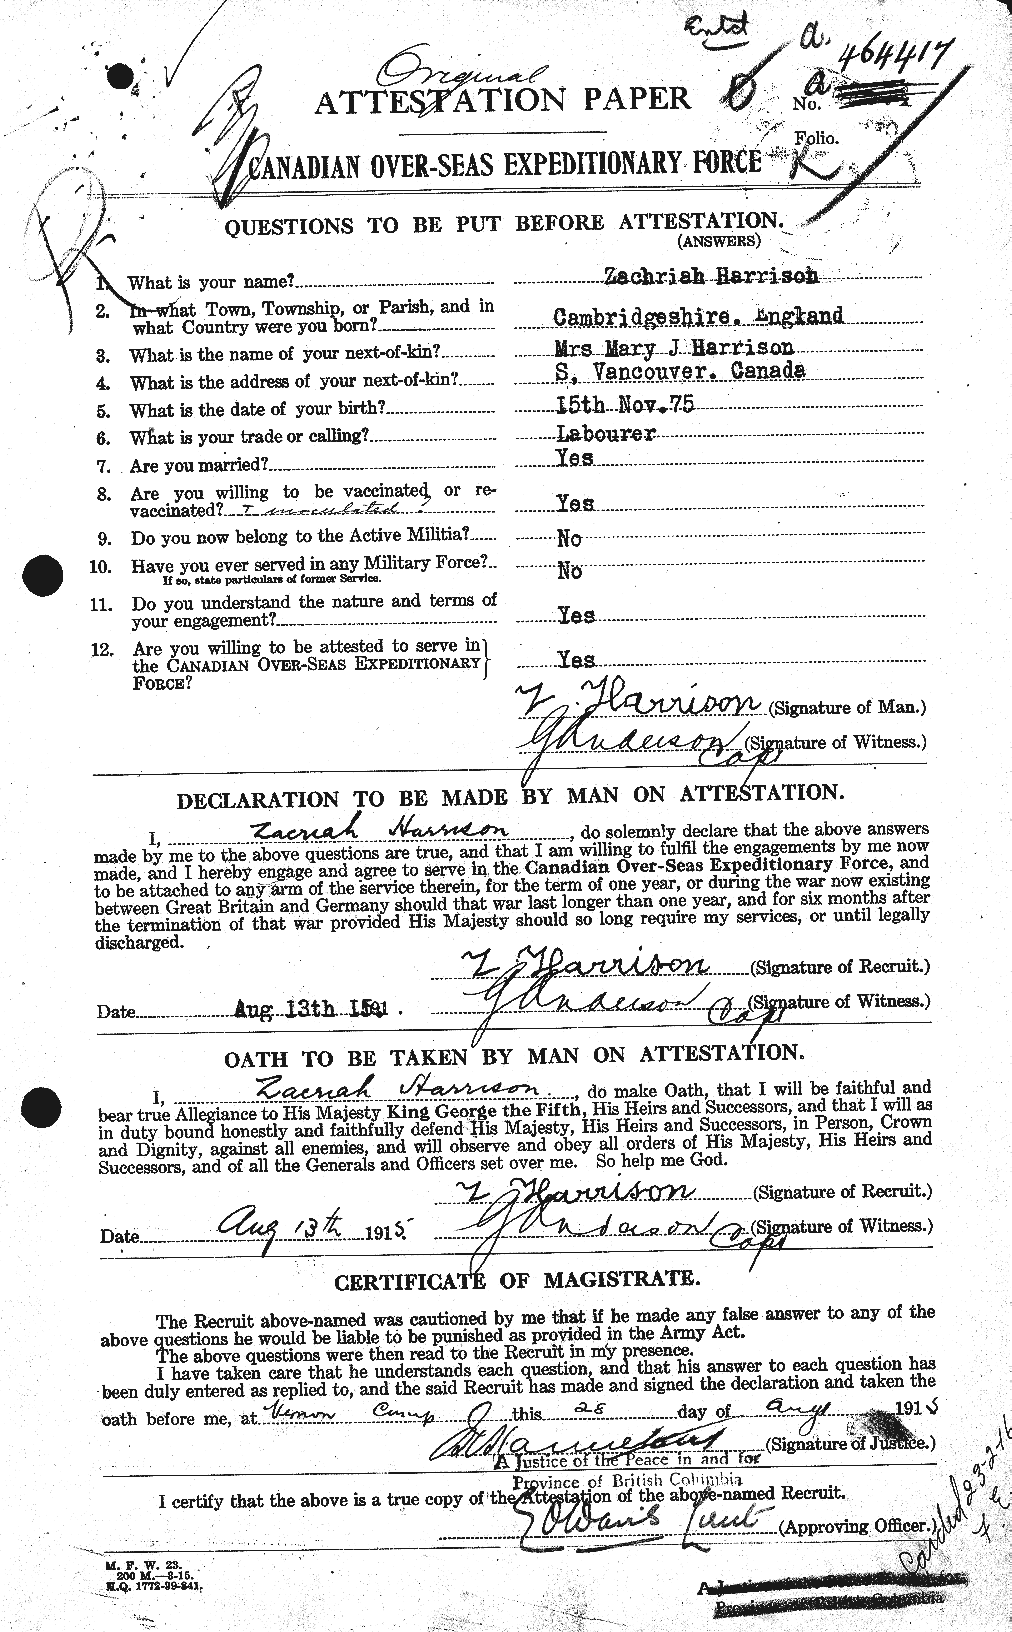 Personnel Records of the First World War - CEF 380008a